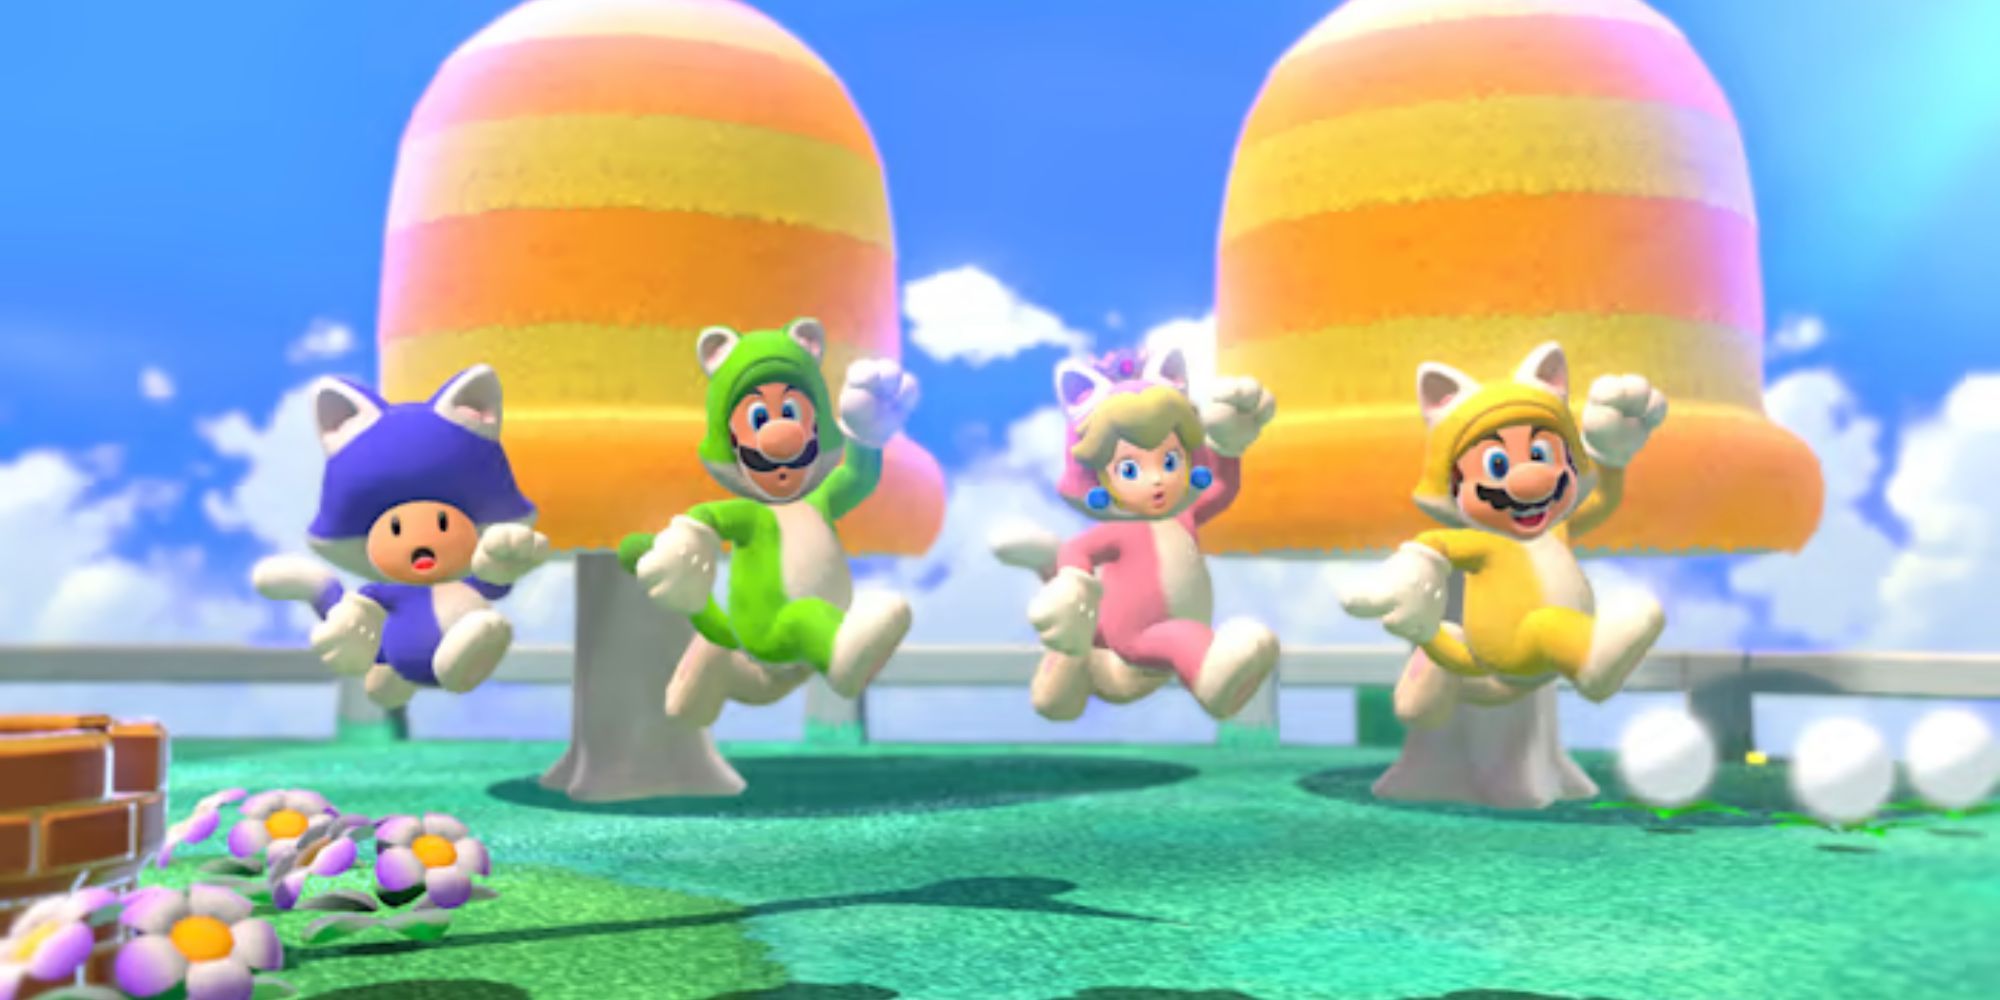 Cat Toad, Cat Luigi, Cat Peach, and Cat Mario jump after clearing a level